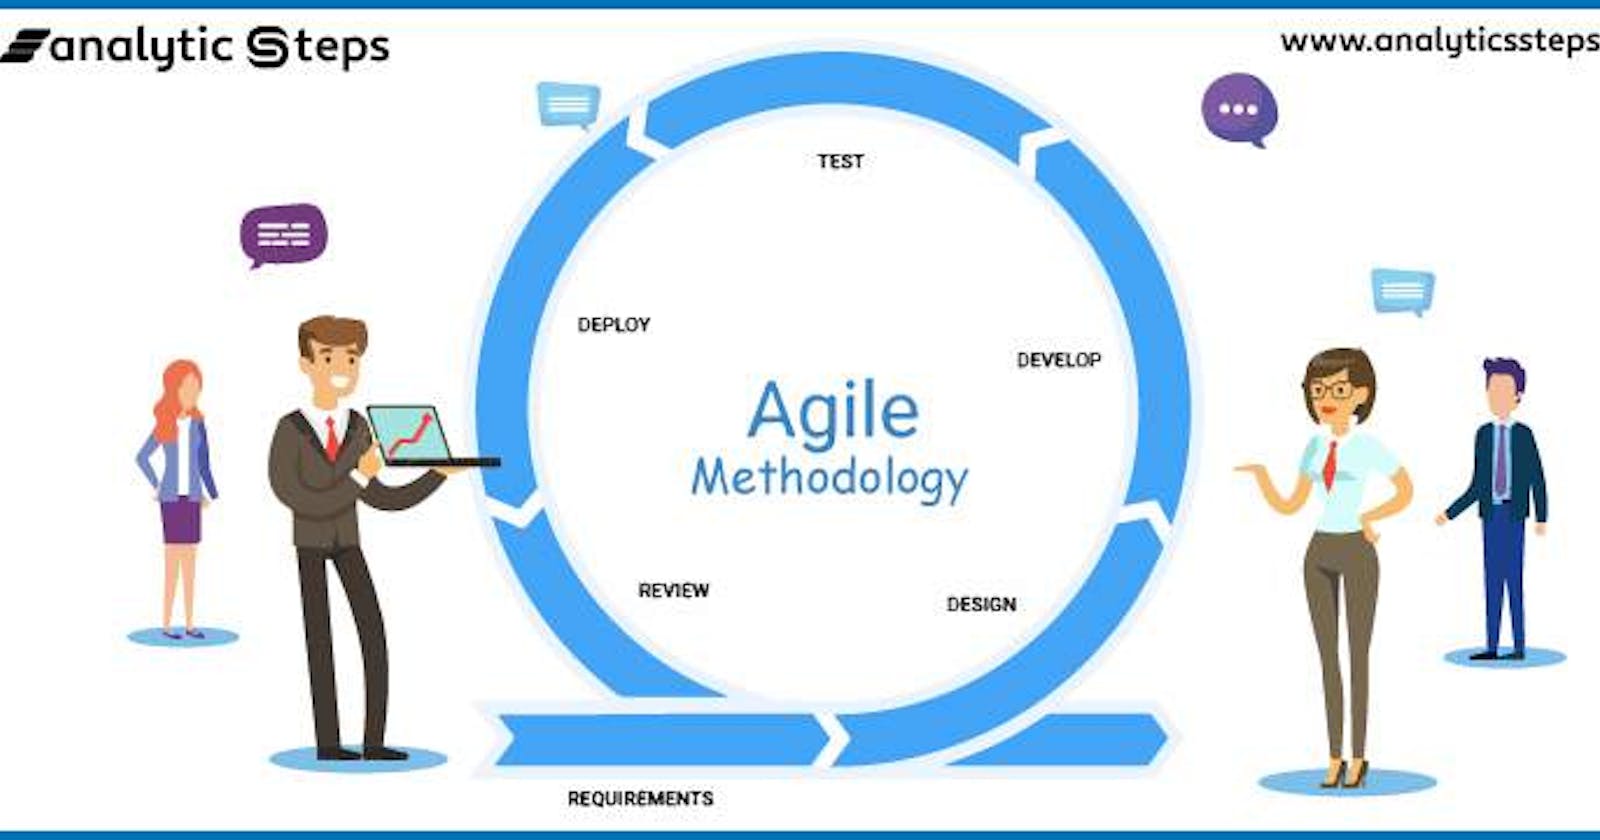 Agile Methodology and its Downfall in DevOps